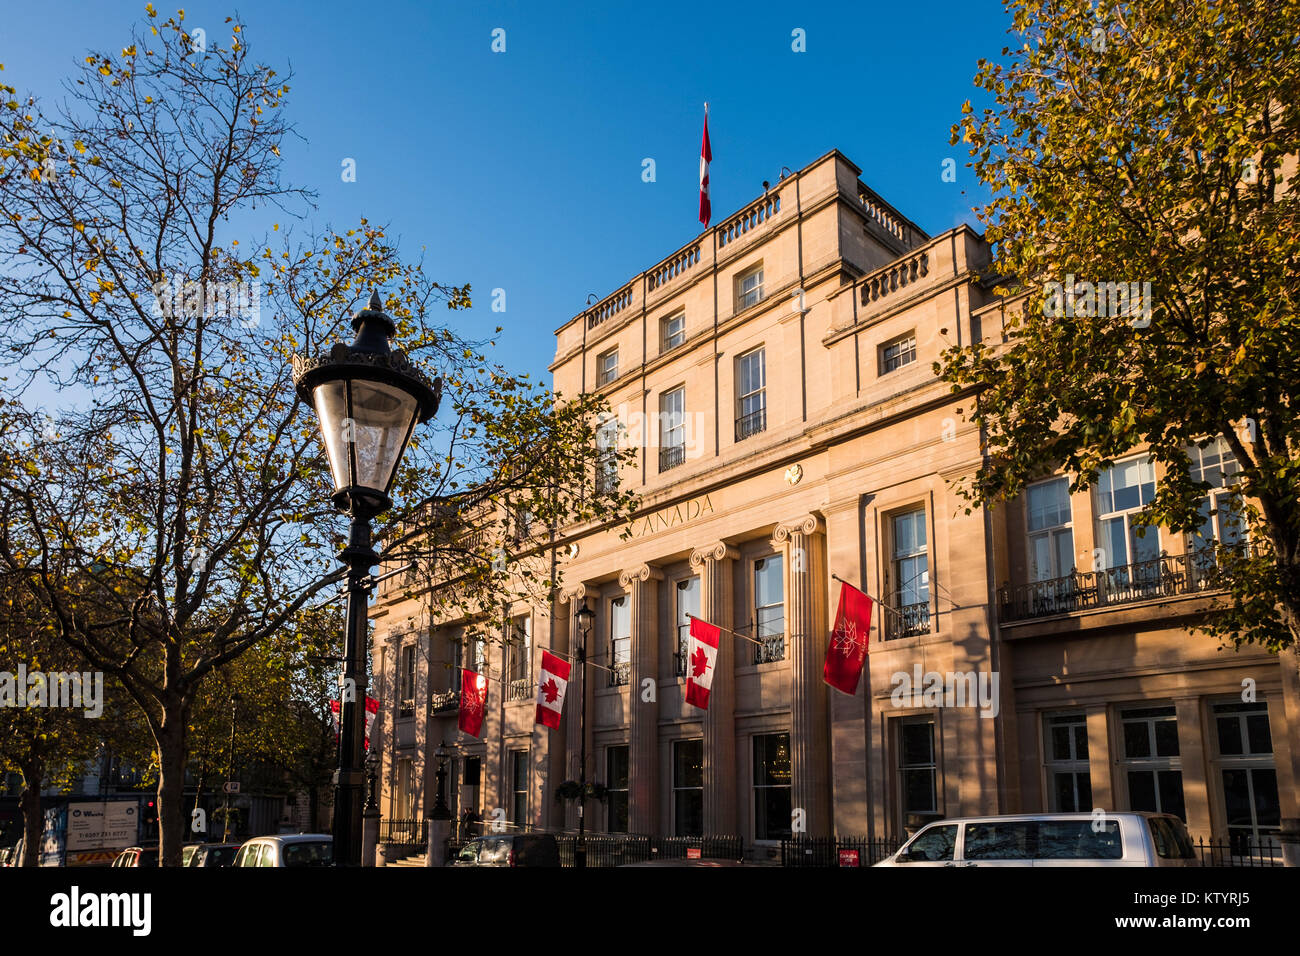 Canada House, offices of the High Commission of Canada, Trafalgar Square, London, England, U.K. Stock Photo